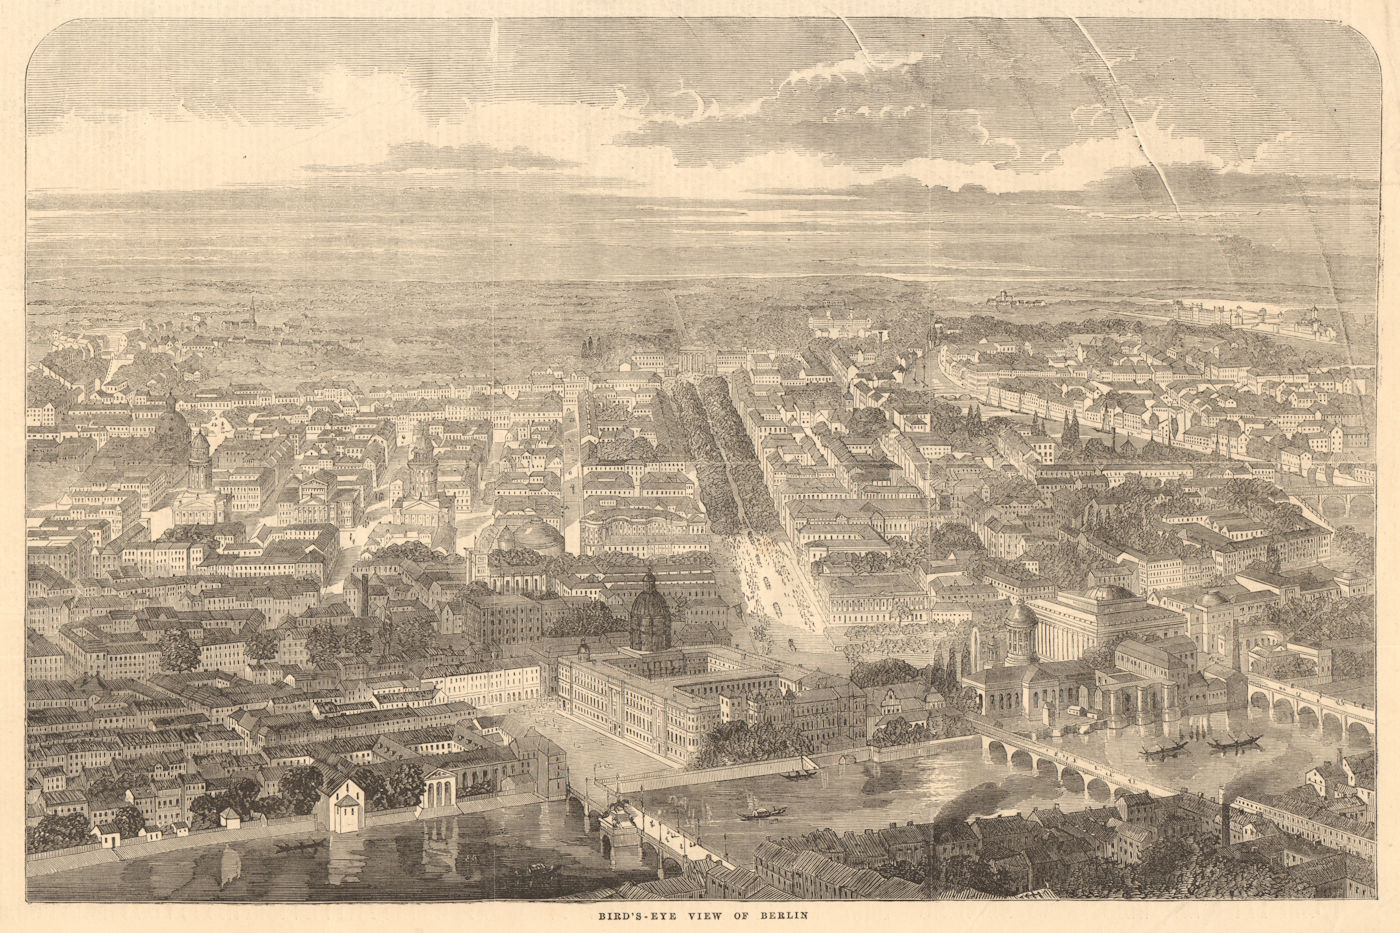 Associate Product Bird's-eye view of Berlin 1858 antique ILN full page print